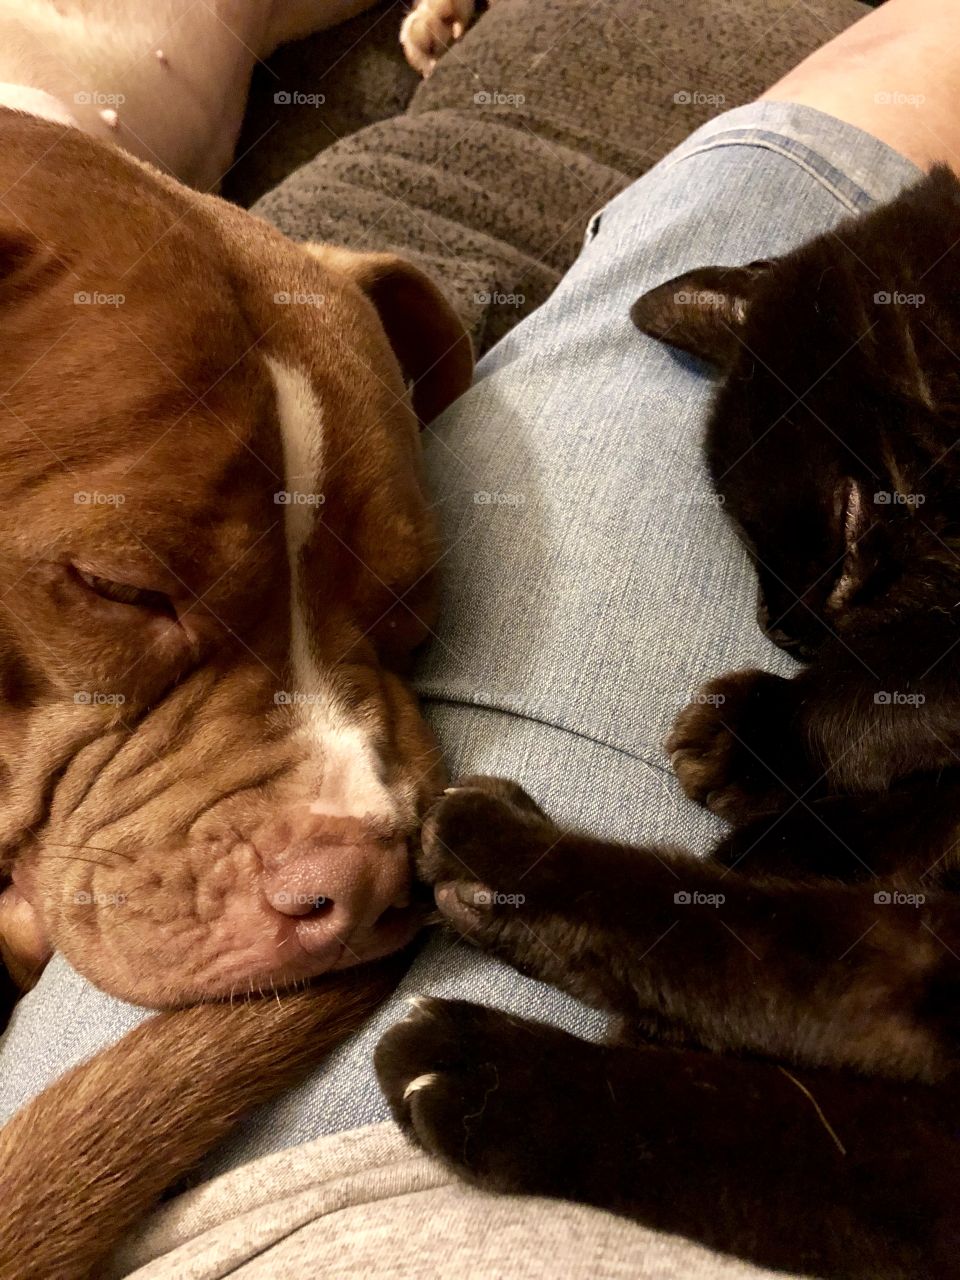 Napping buddies from two ends of the spectrum, a young thoroughbred pup dozes next to 20-year-old cat. 